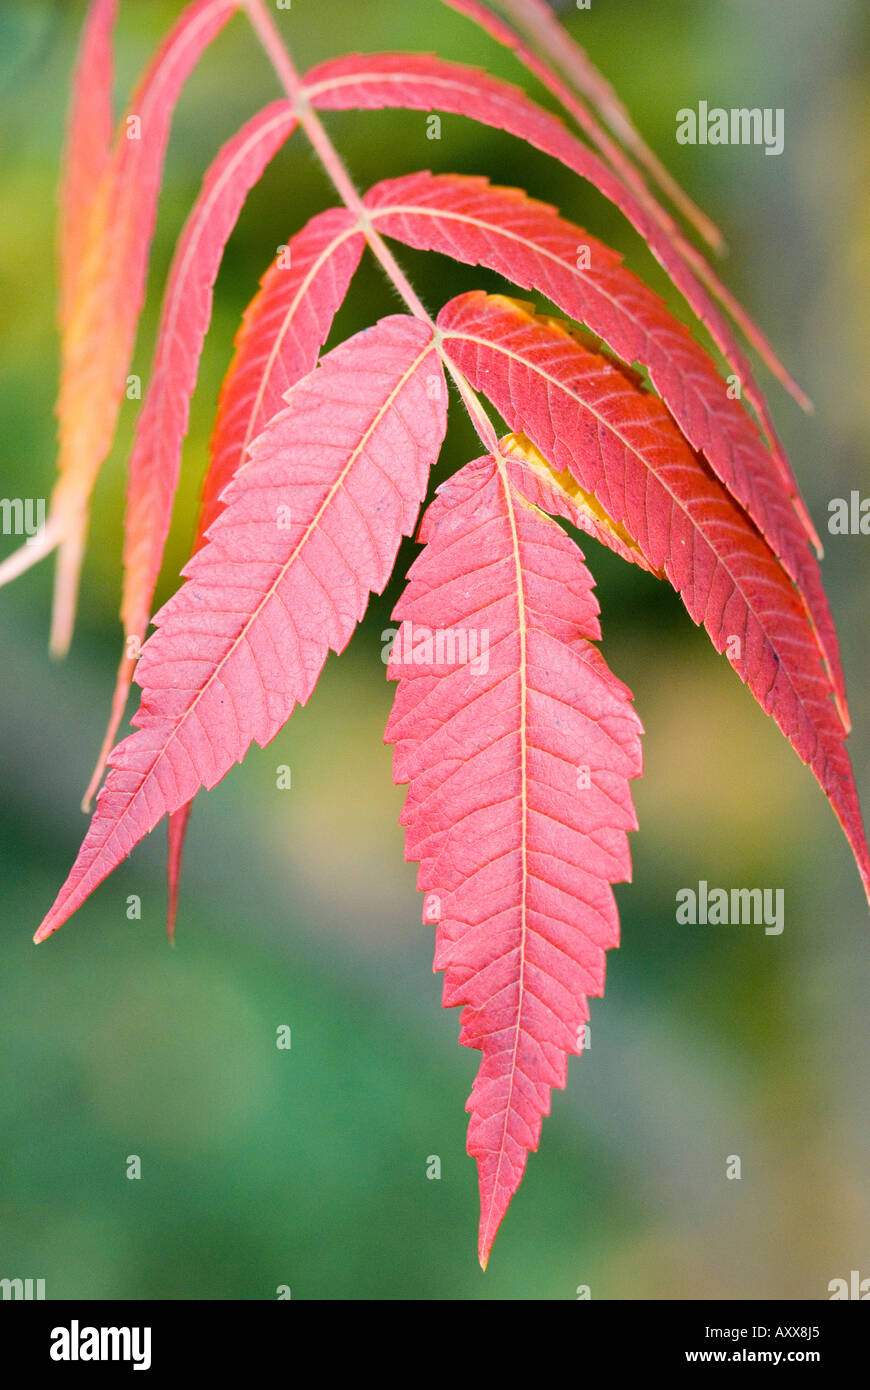 Staghorn sumac leaves turning red in autumn Rhus typhina Stock Photo